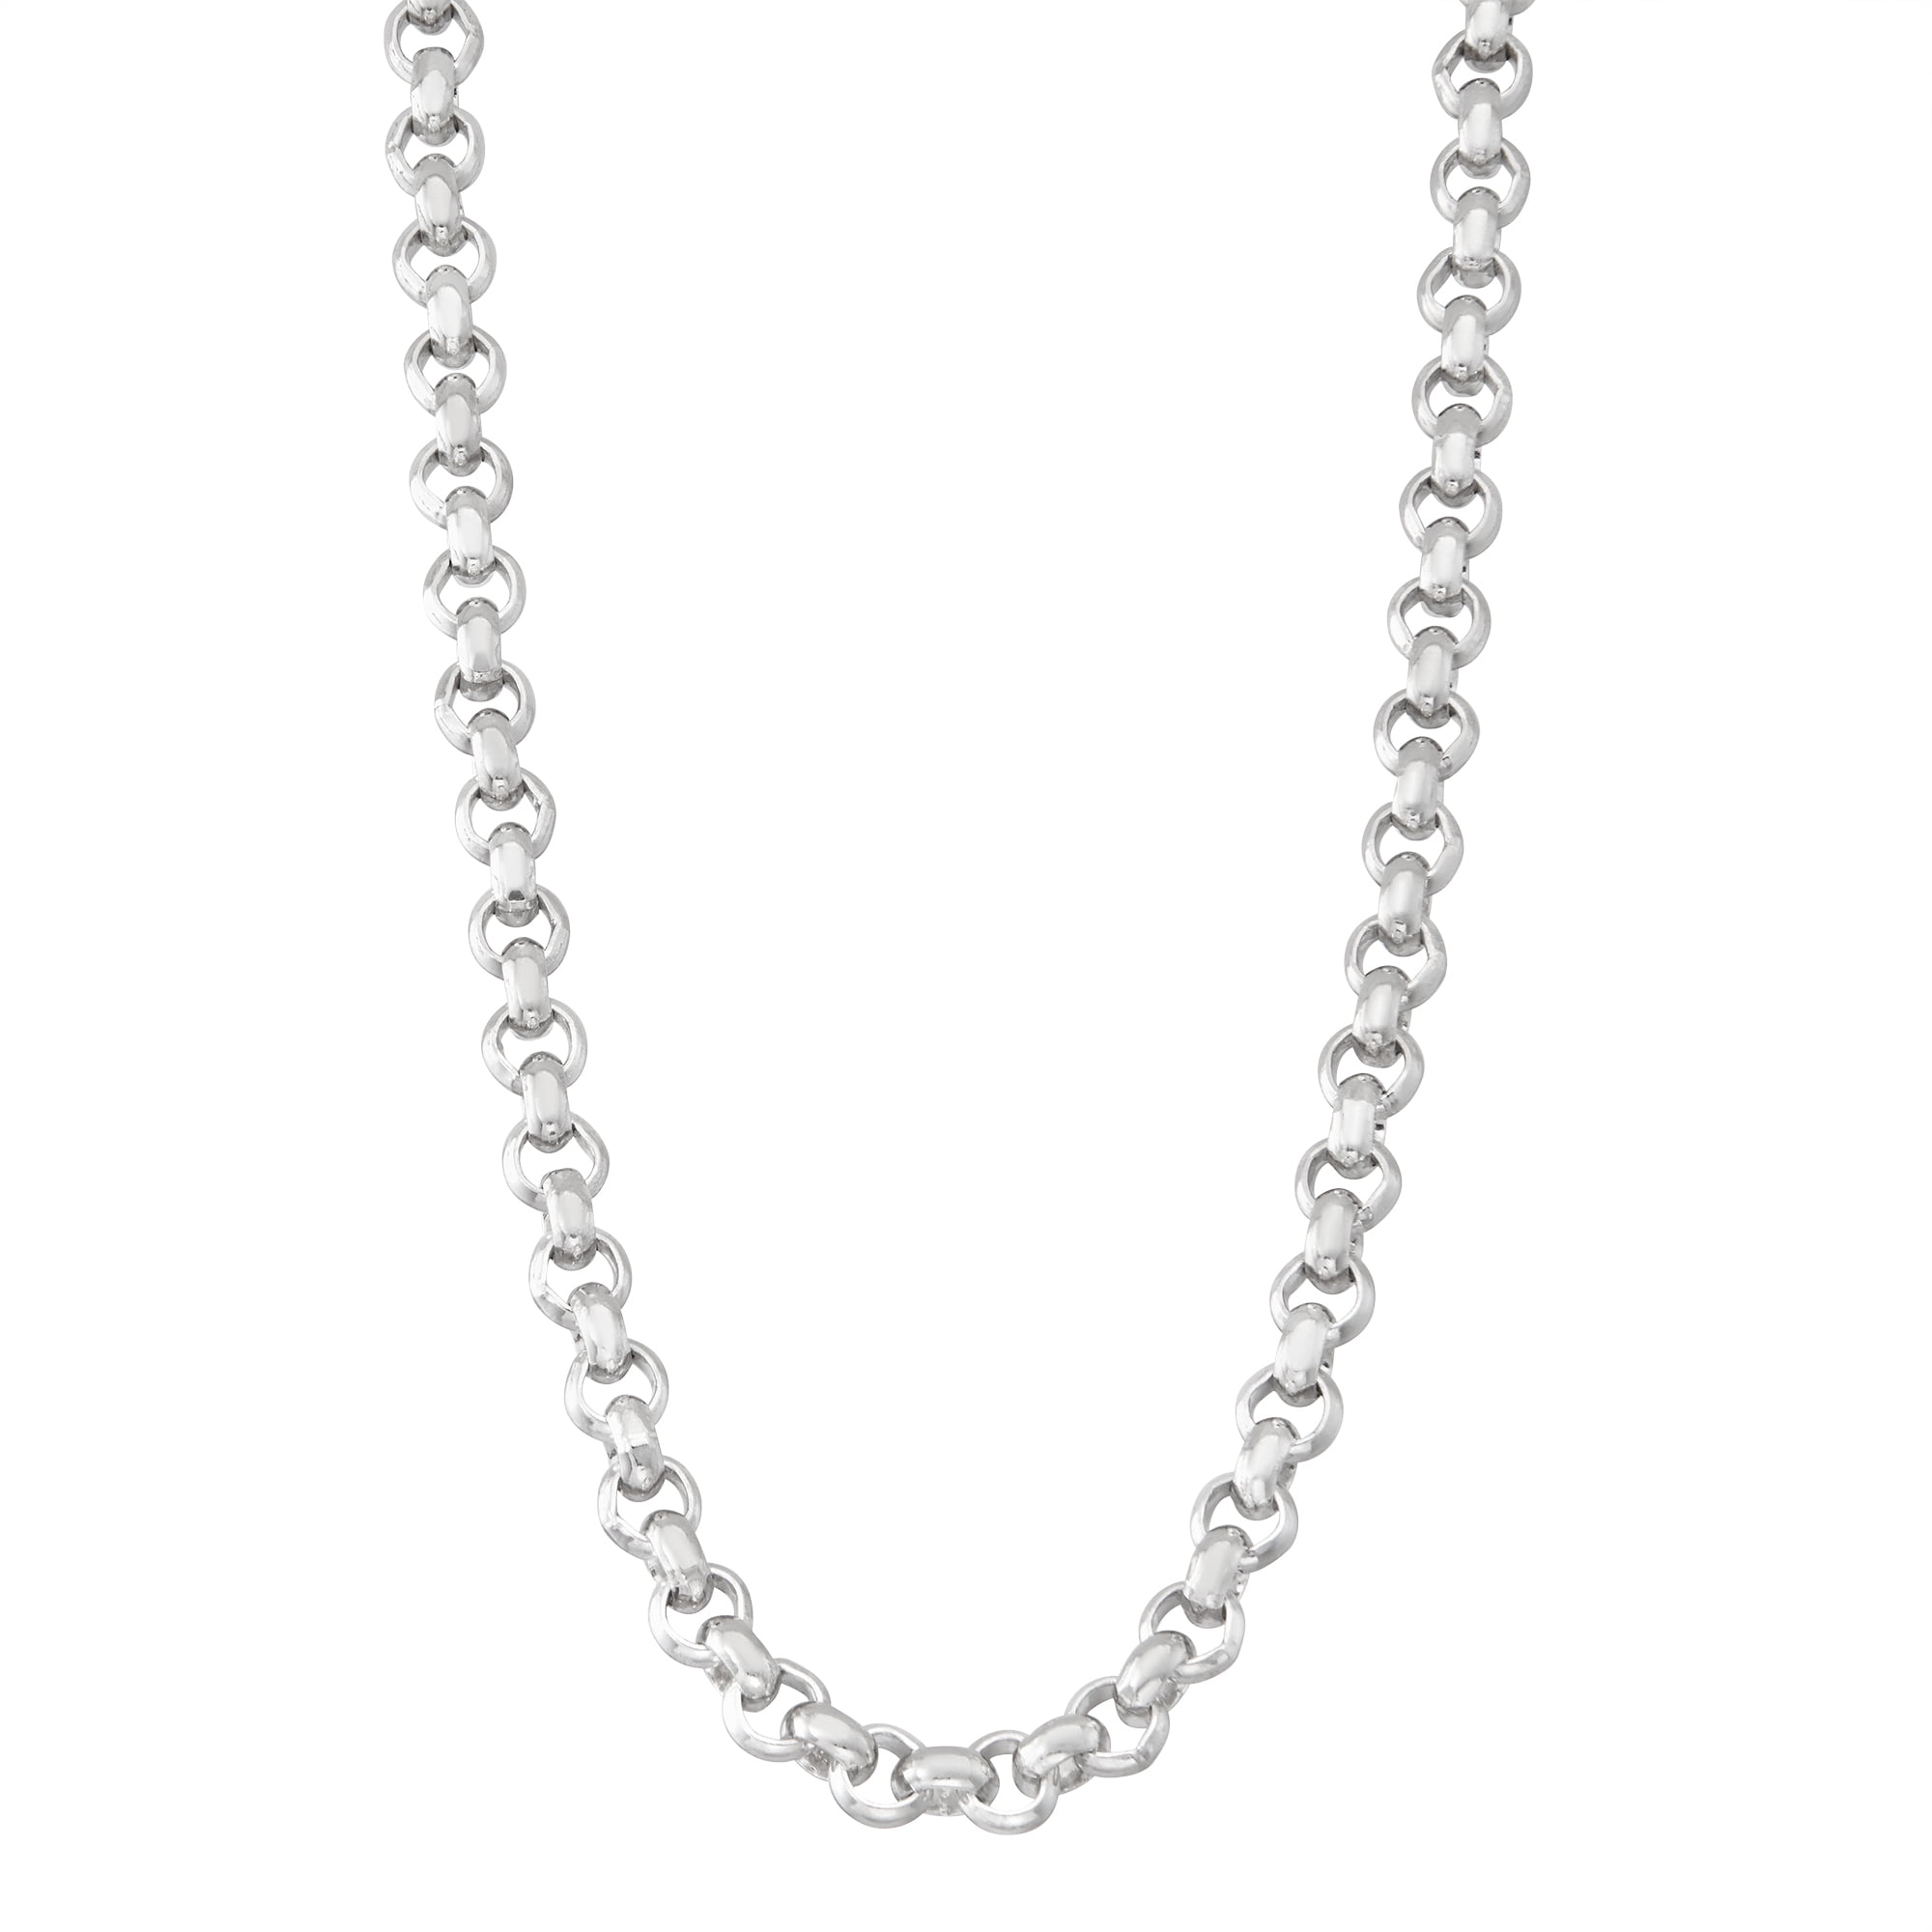 Superb Ladies Large Silver Plated 34" Long Rolo Chain Costume Fashion Necklace 